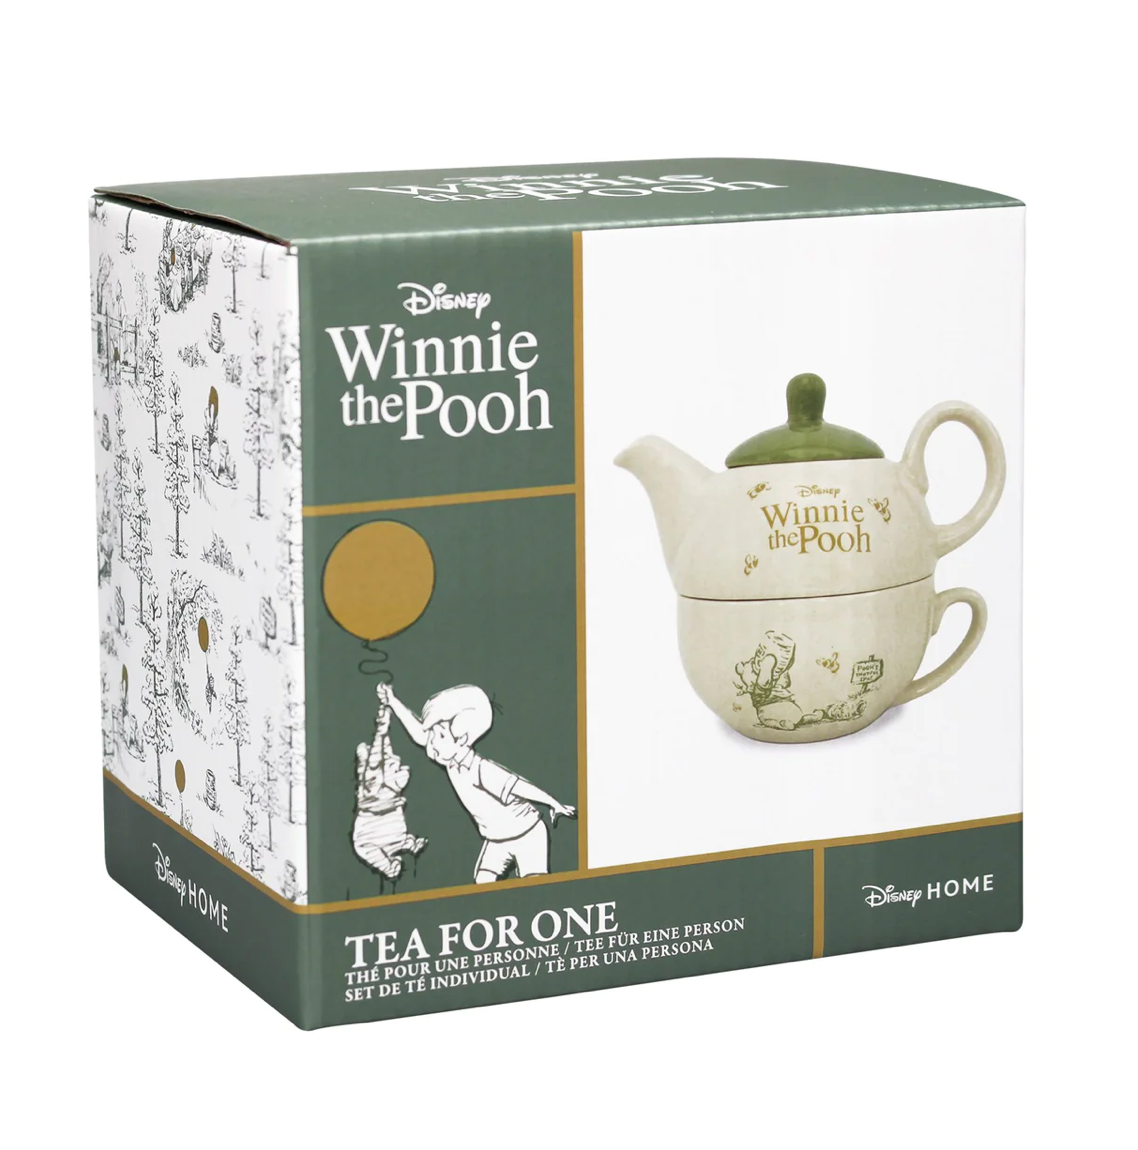 Winnie the Pooh Teapot & Cup for One